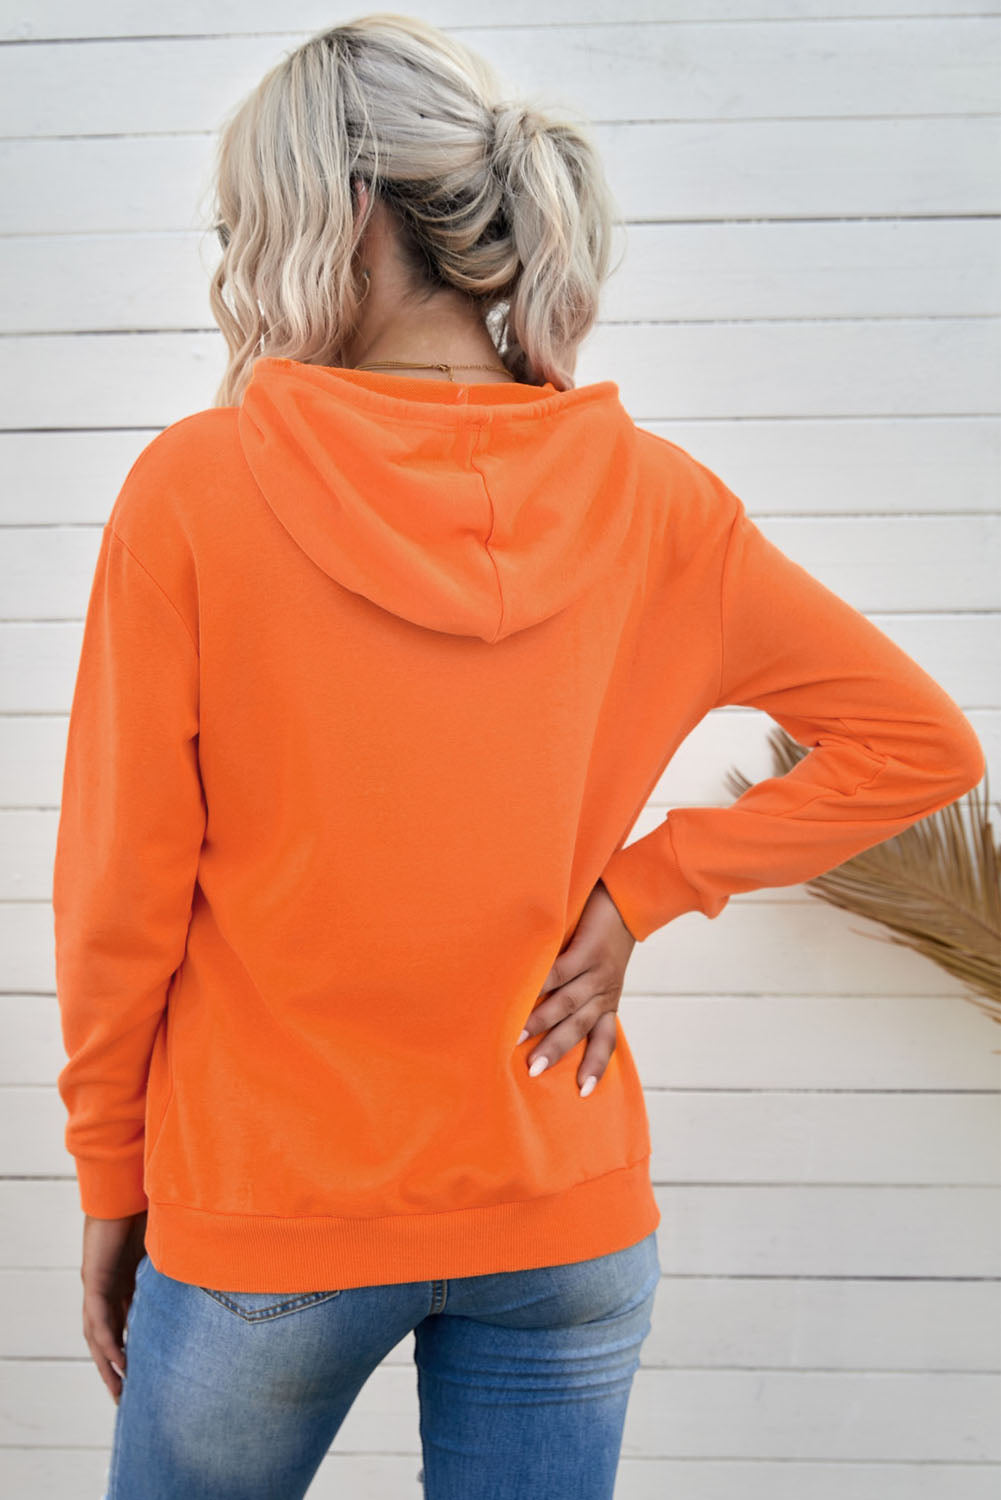 Drawstring Long Sleeve Hoodie - Women’s Clothing & Accessories - Shirts & Tops - 2 - 2024